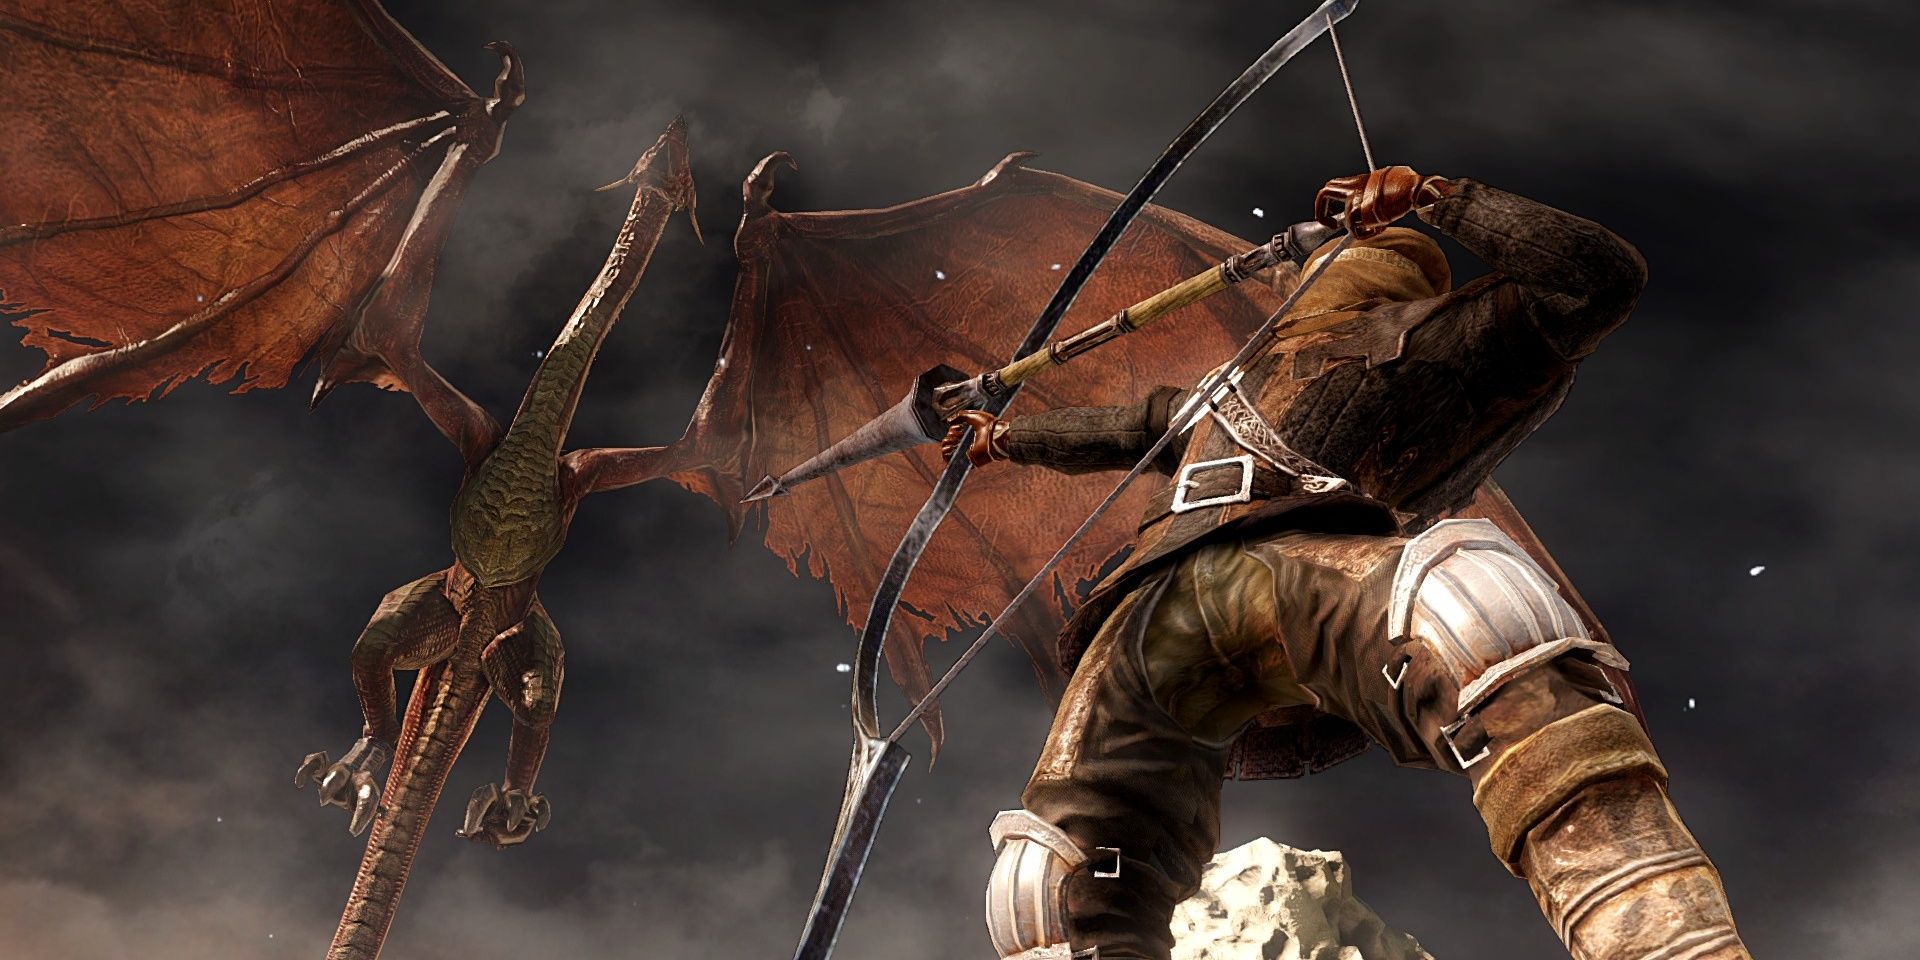 A player about to shoot down a dragon in Dark Souls 2